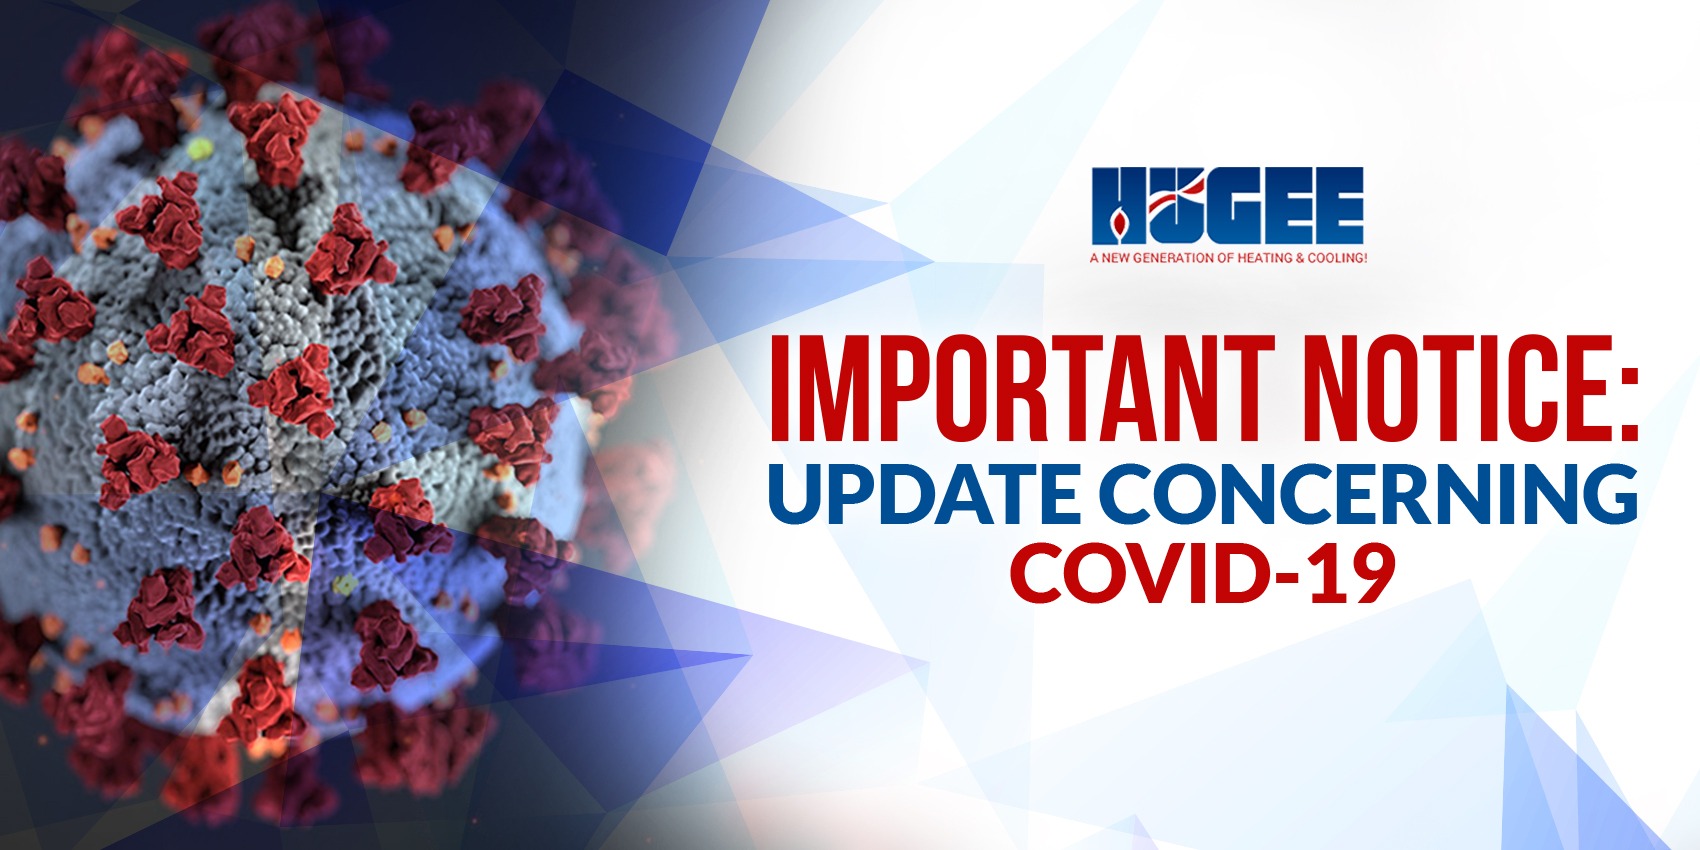 Important notice about COVID-19